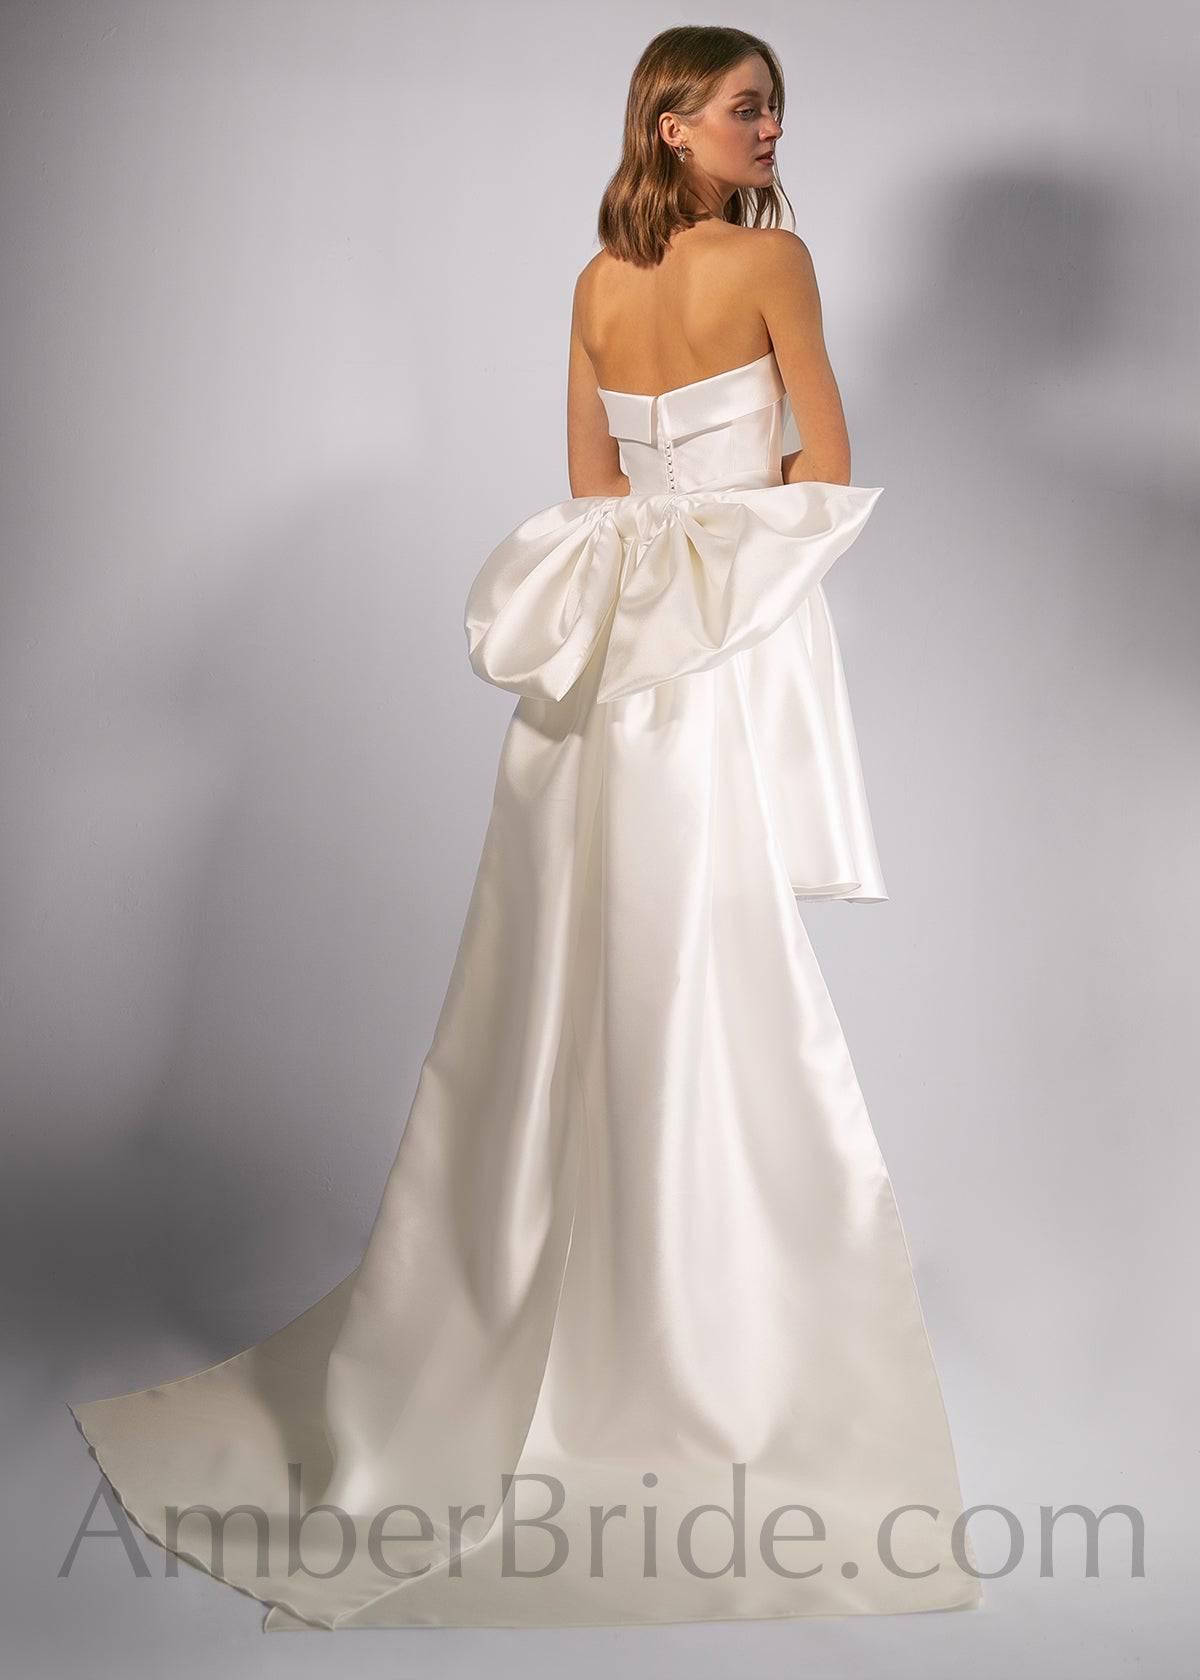 Exclusive A Line Strapless Short Satin Wedding Dress With A Bow - AmberBride